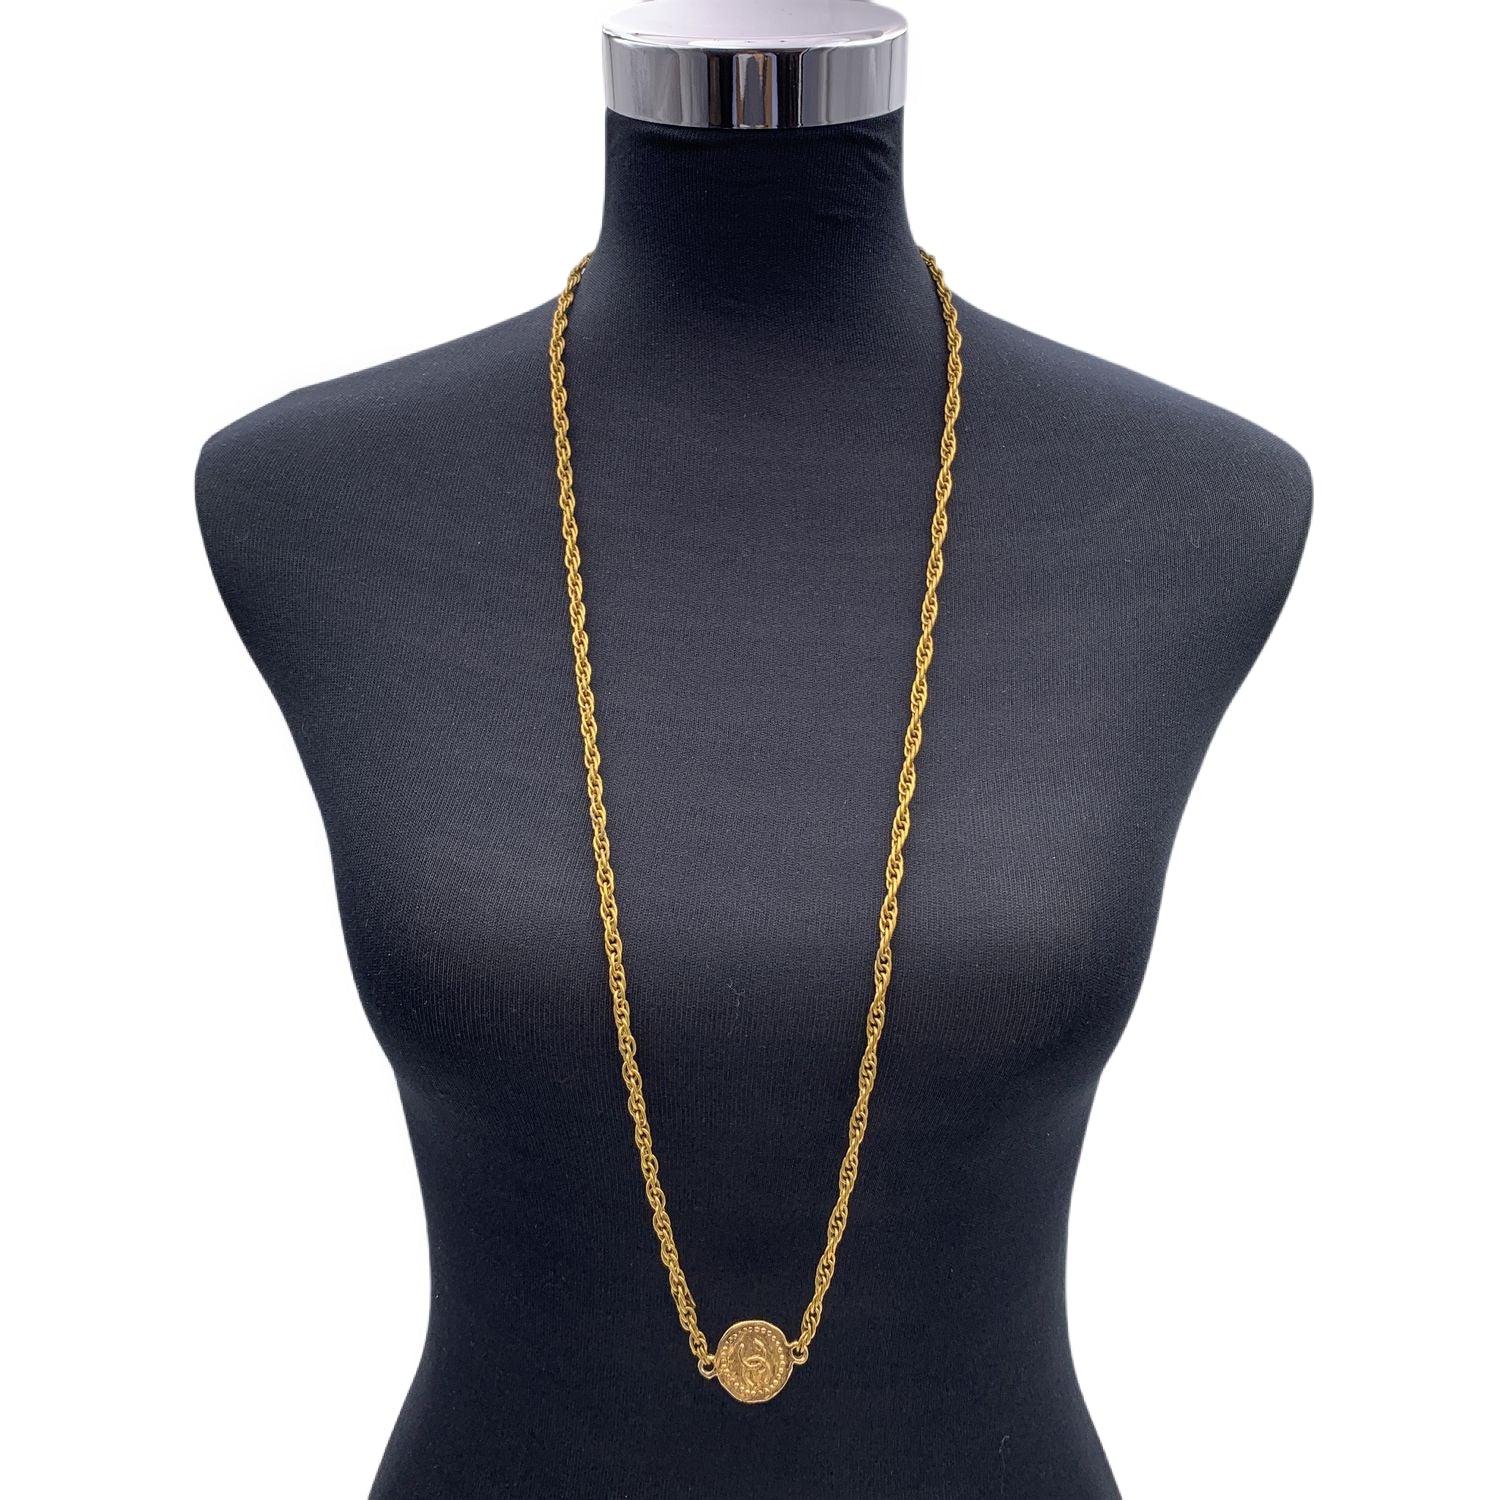 Vintage gold metal chain necklace from CHANEL. It feature a beautiful gold metal chain with round coin medallion with CC logo. No closure. Necklace drop: 17 inches - 43.2 cm. 'CHANEL - CC - Made in France' round tab Condition A - EXCELLENT Gently